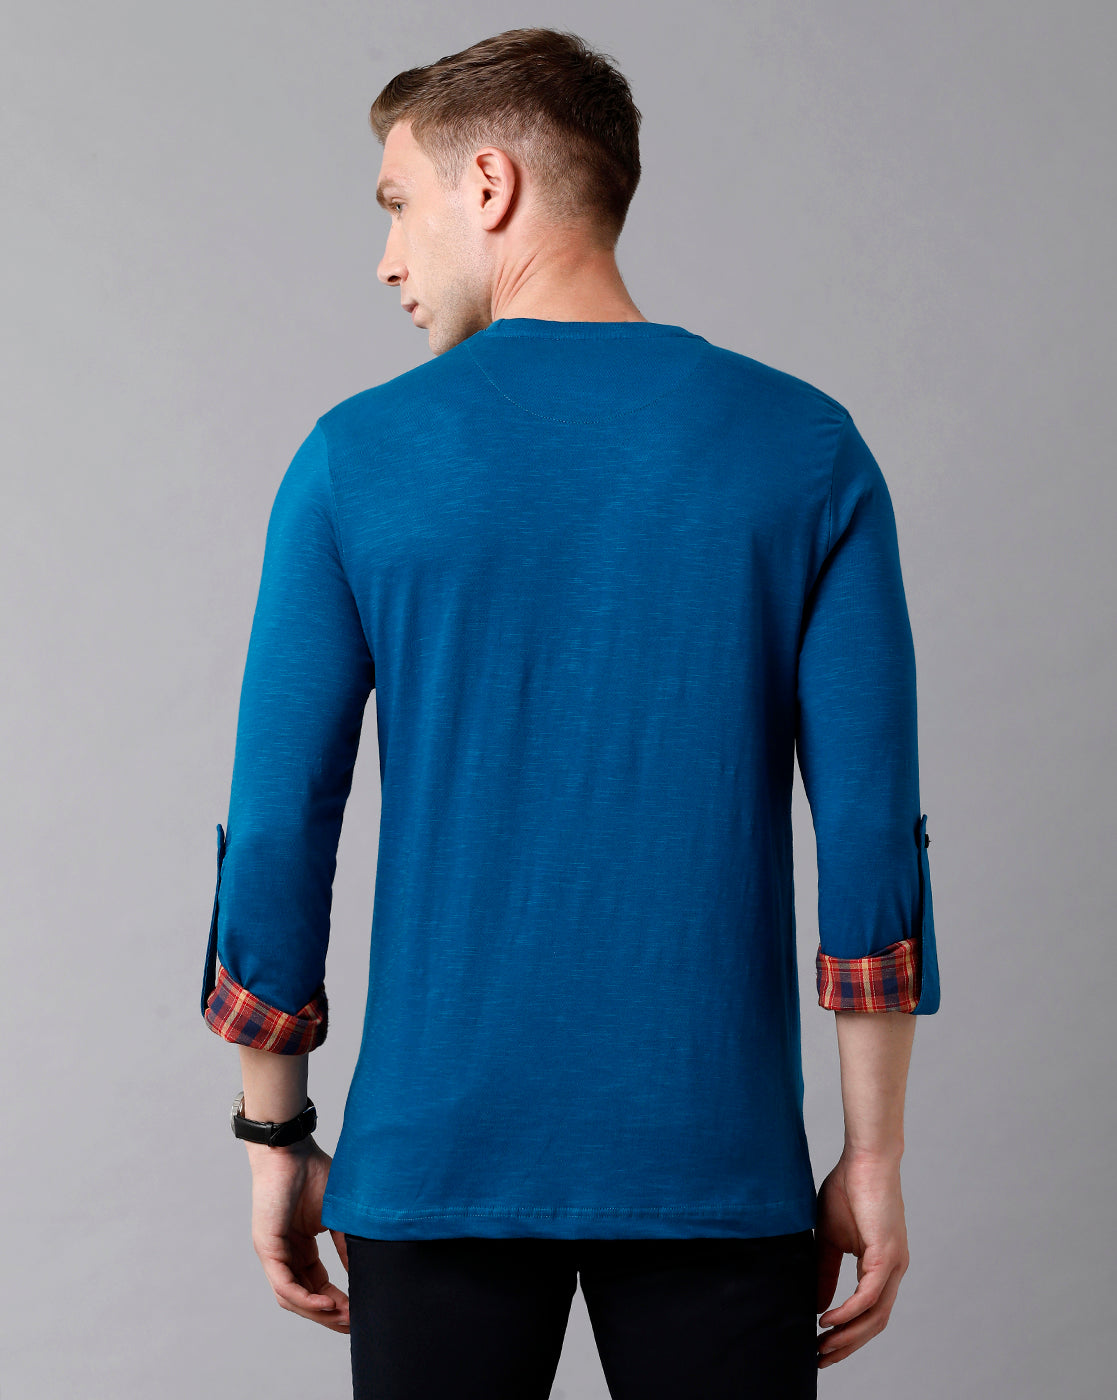 Classic Polo Men's Cotton Solid Full Sleeve Slim Fit Round Neck Royal Blue Color T-Shirt | Baleno Fs - 485 A